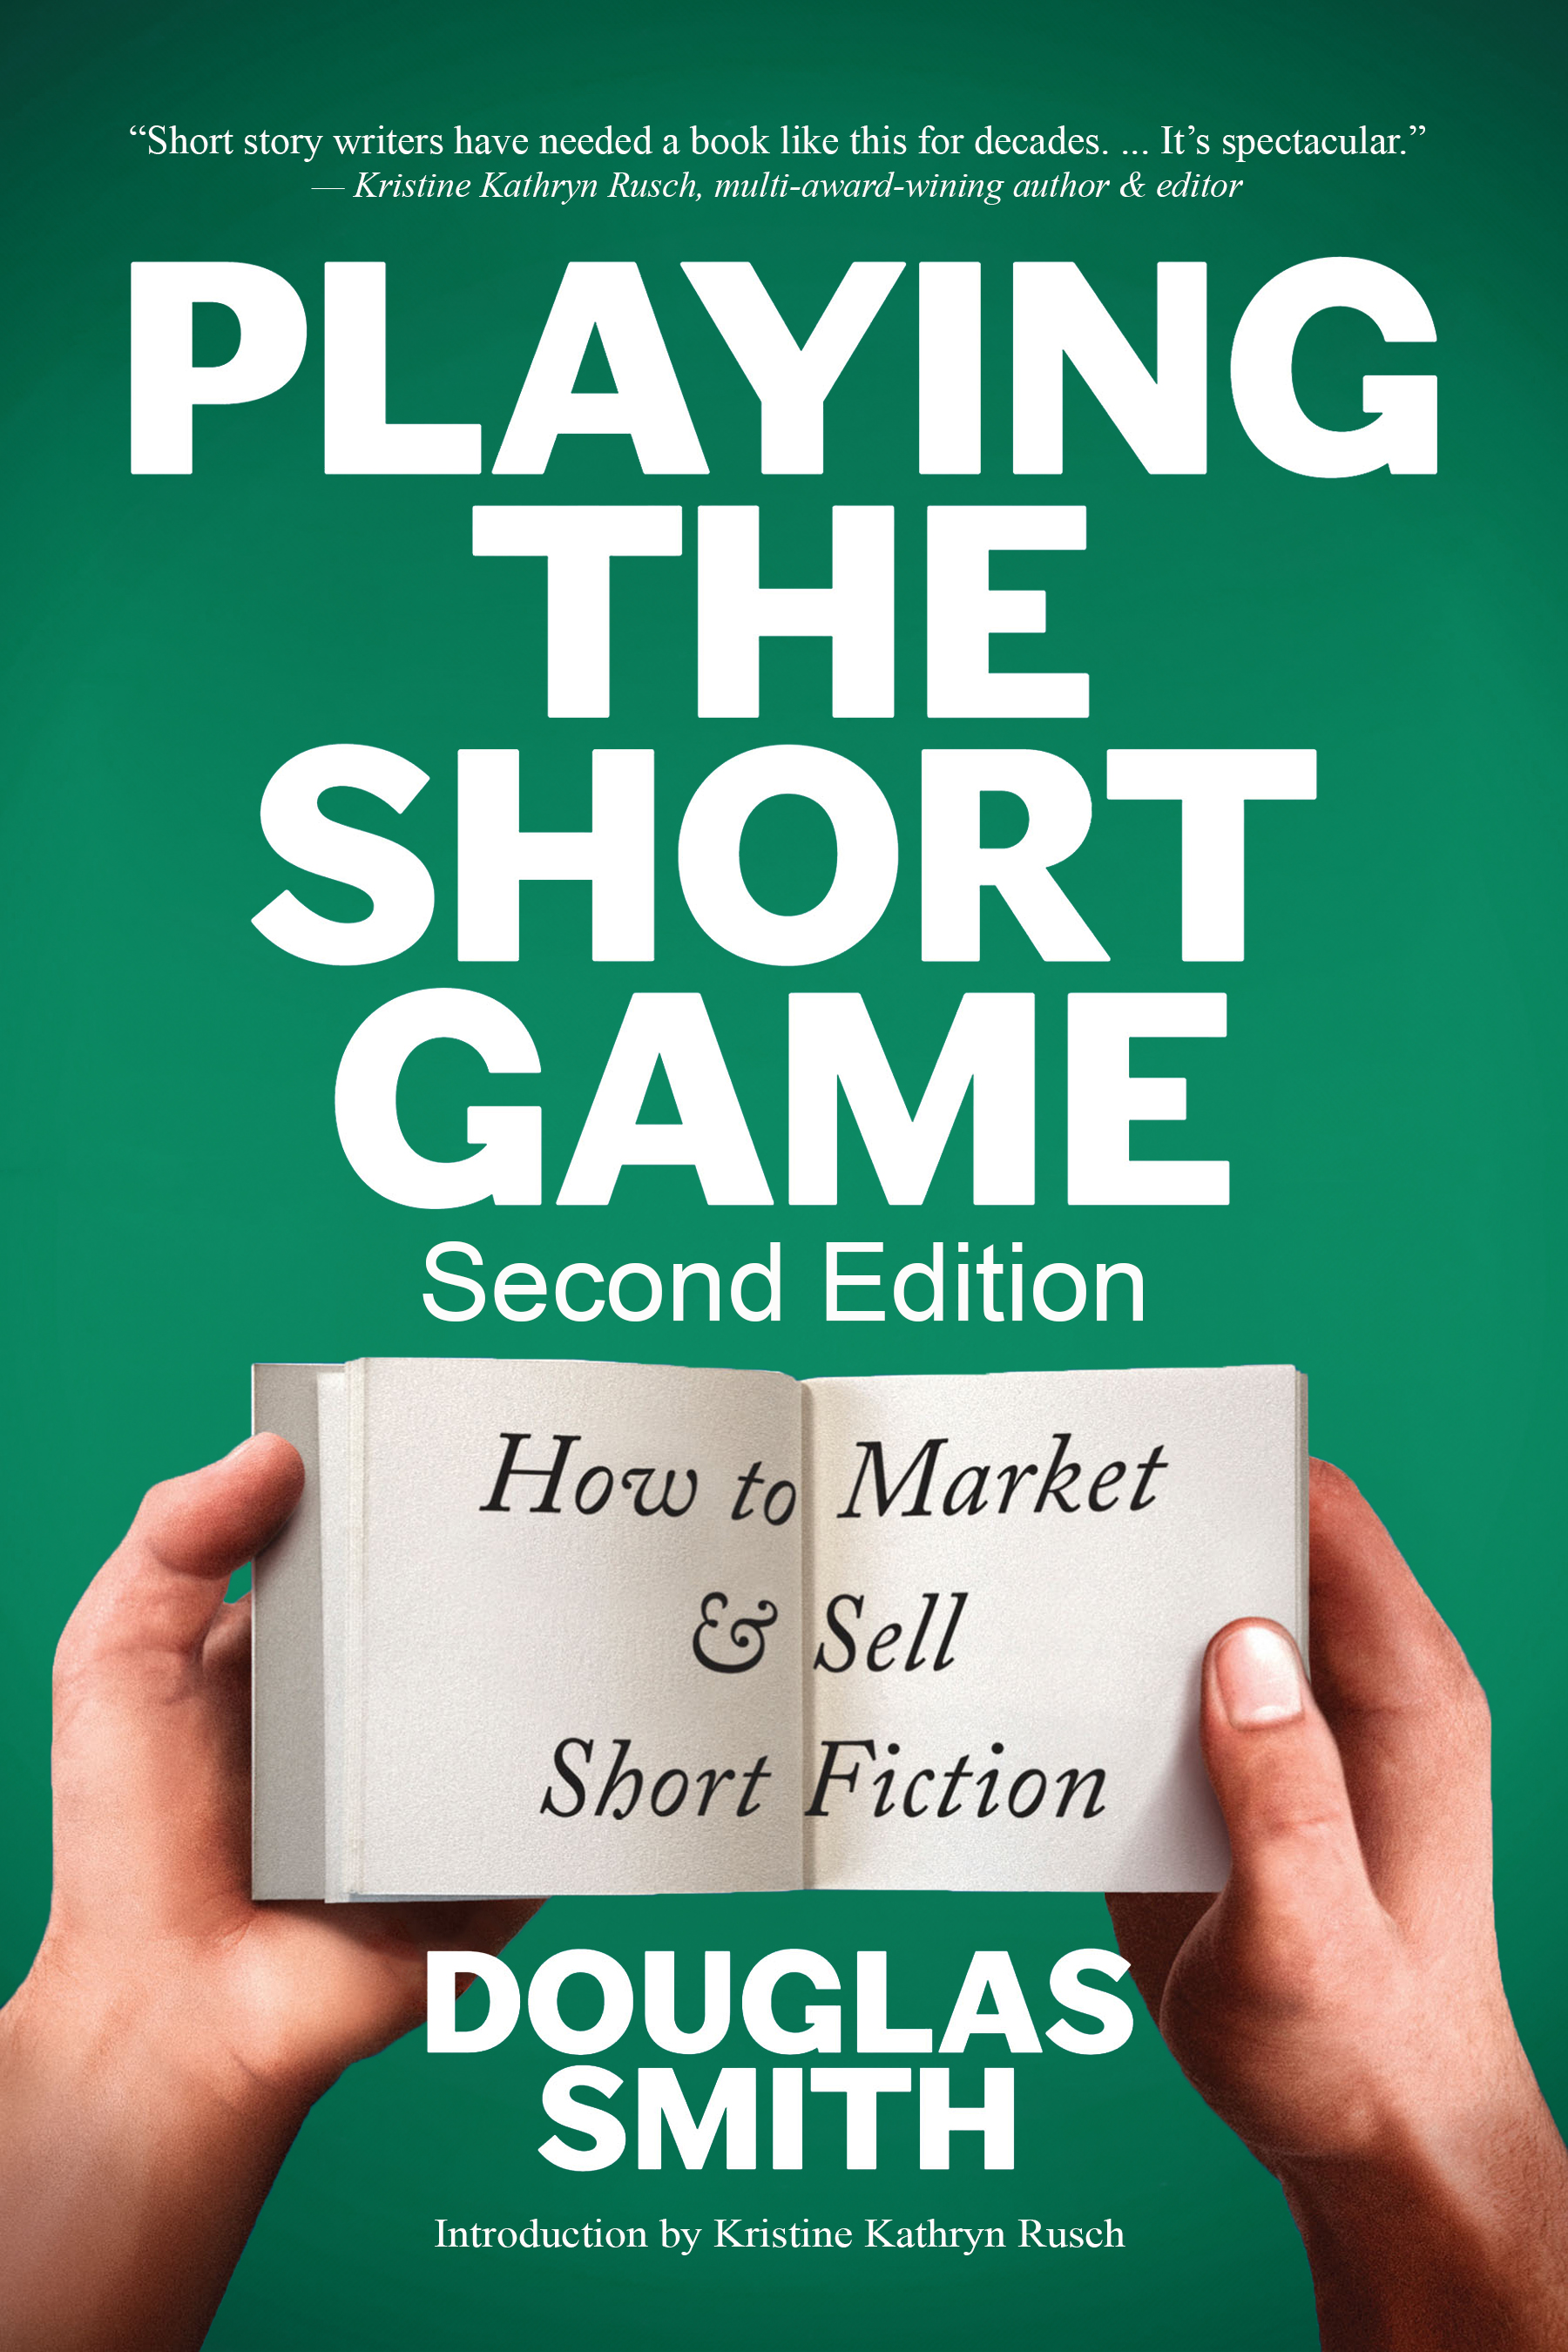 Short Game 2 cover